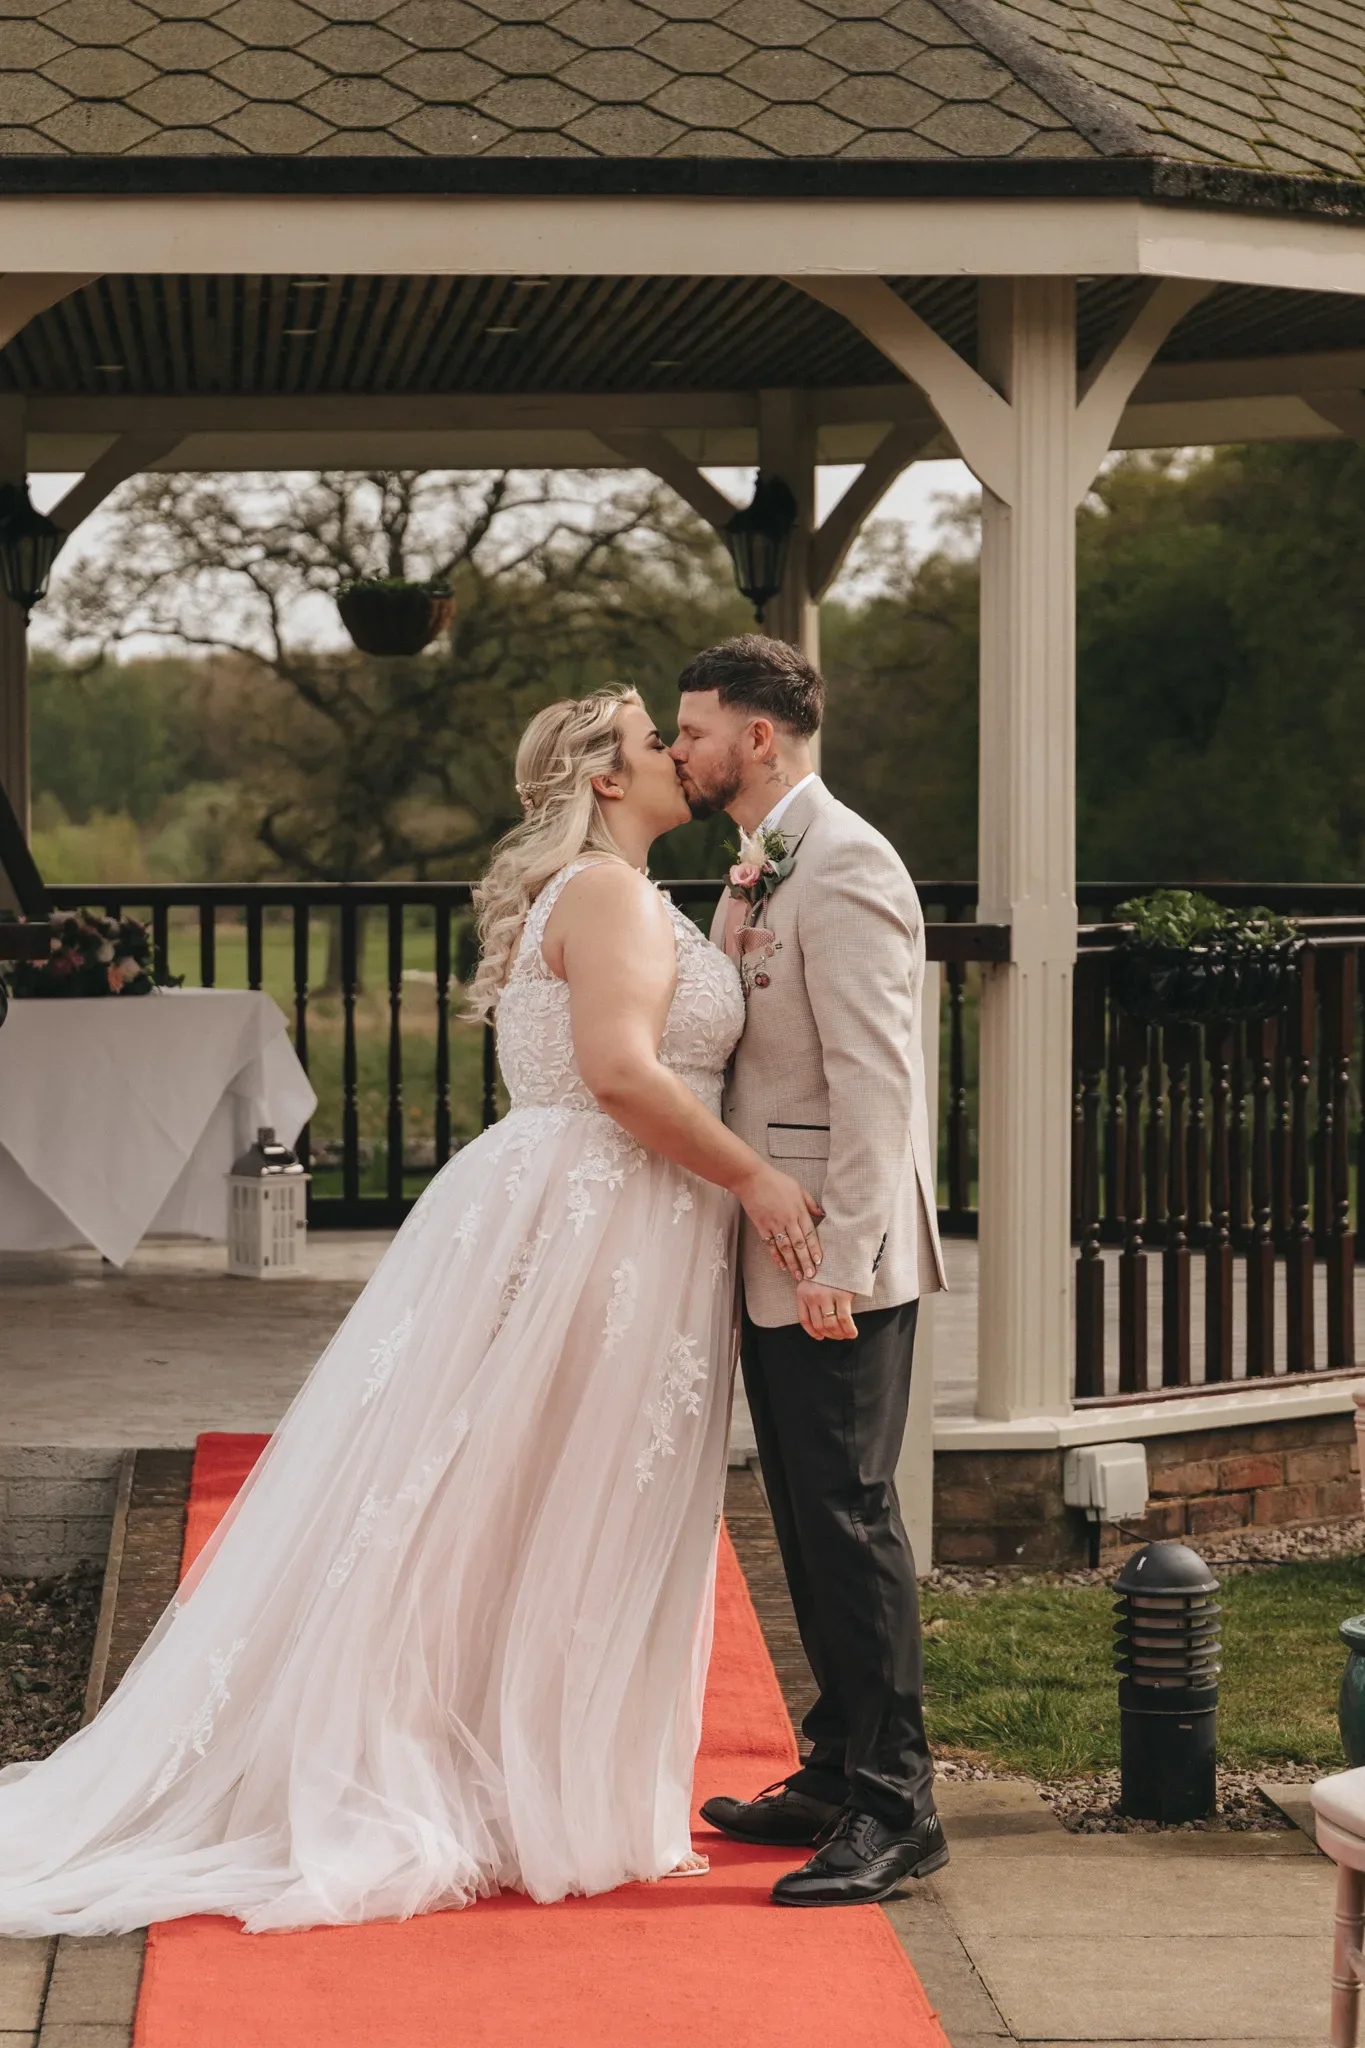 A bride and groom share a kiss under a gazebo. the bride is in a flowing white gown with lace details, and the groom wears a light gray suit with a floral boutonniere. a red carpet and greenery frame the scene.